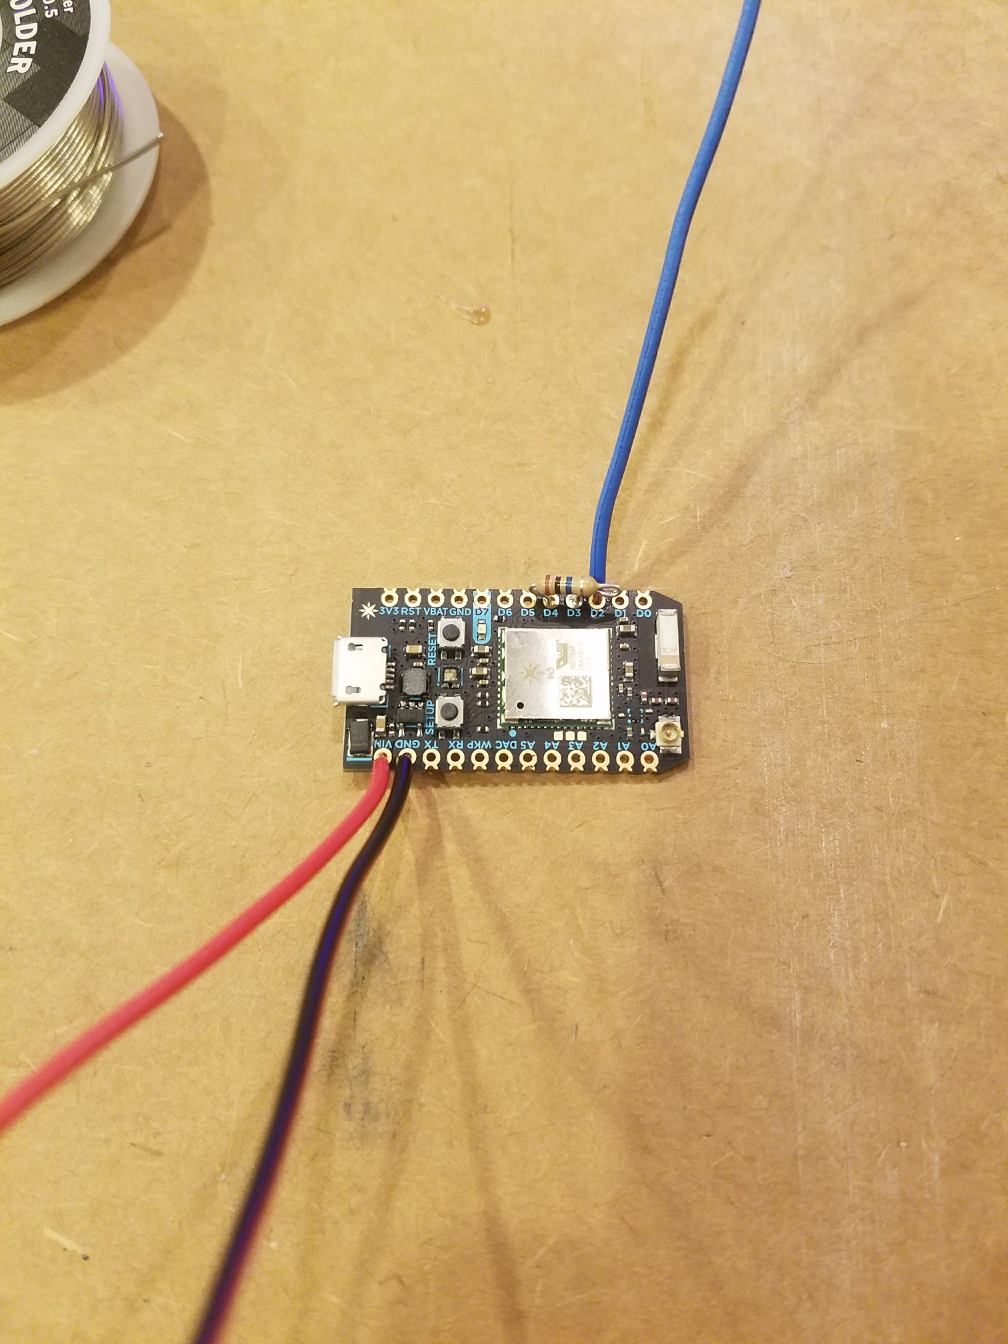 Photon with components soldered on